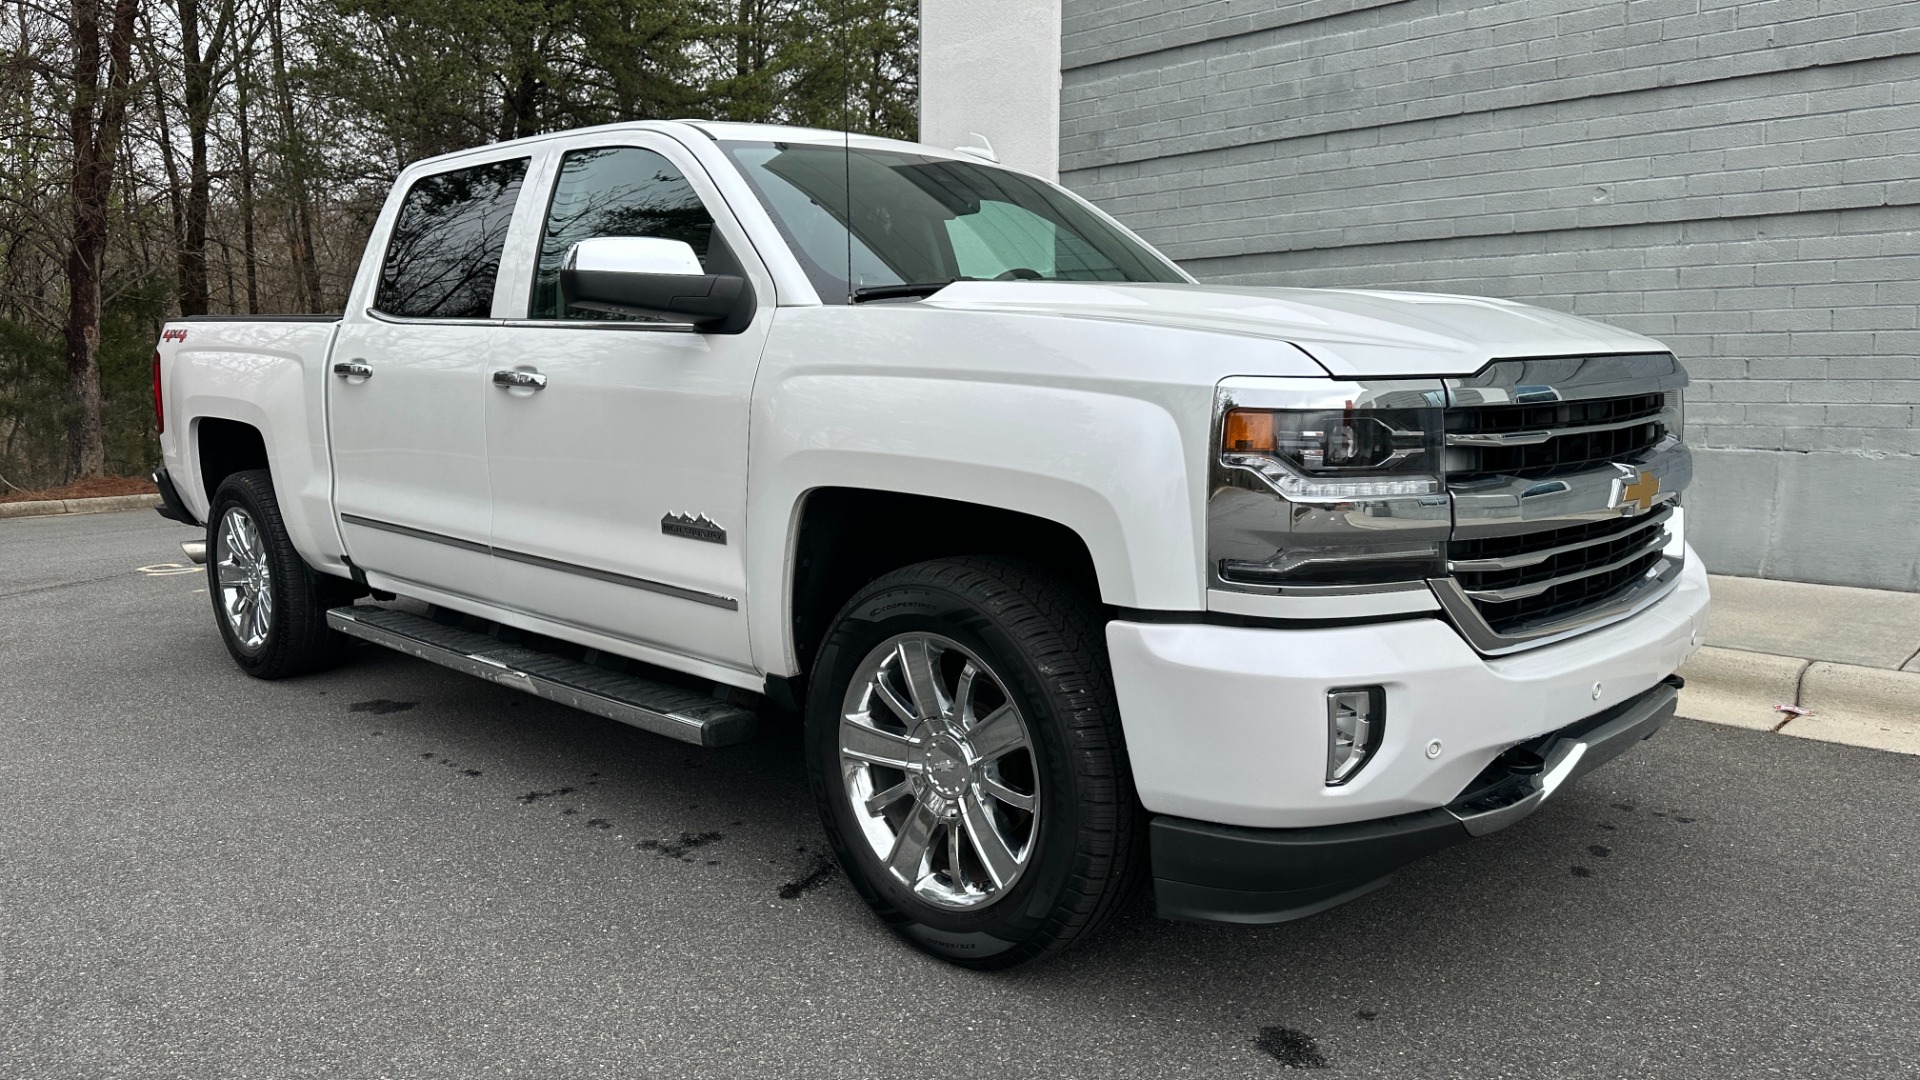 Used 2016 Chevrolet Silverado 1500 HIGH COUNTRY / PREMIUM PACKAGE / PEARL PAINT / SUNROOF / 4X4 for sale Sold at Formula Imports in Charlotte NC 28227 5